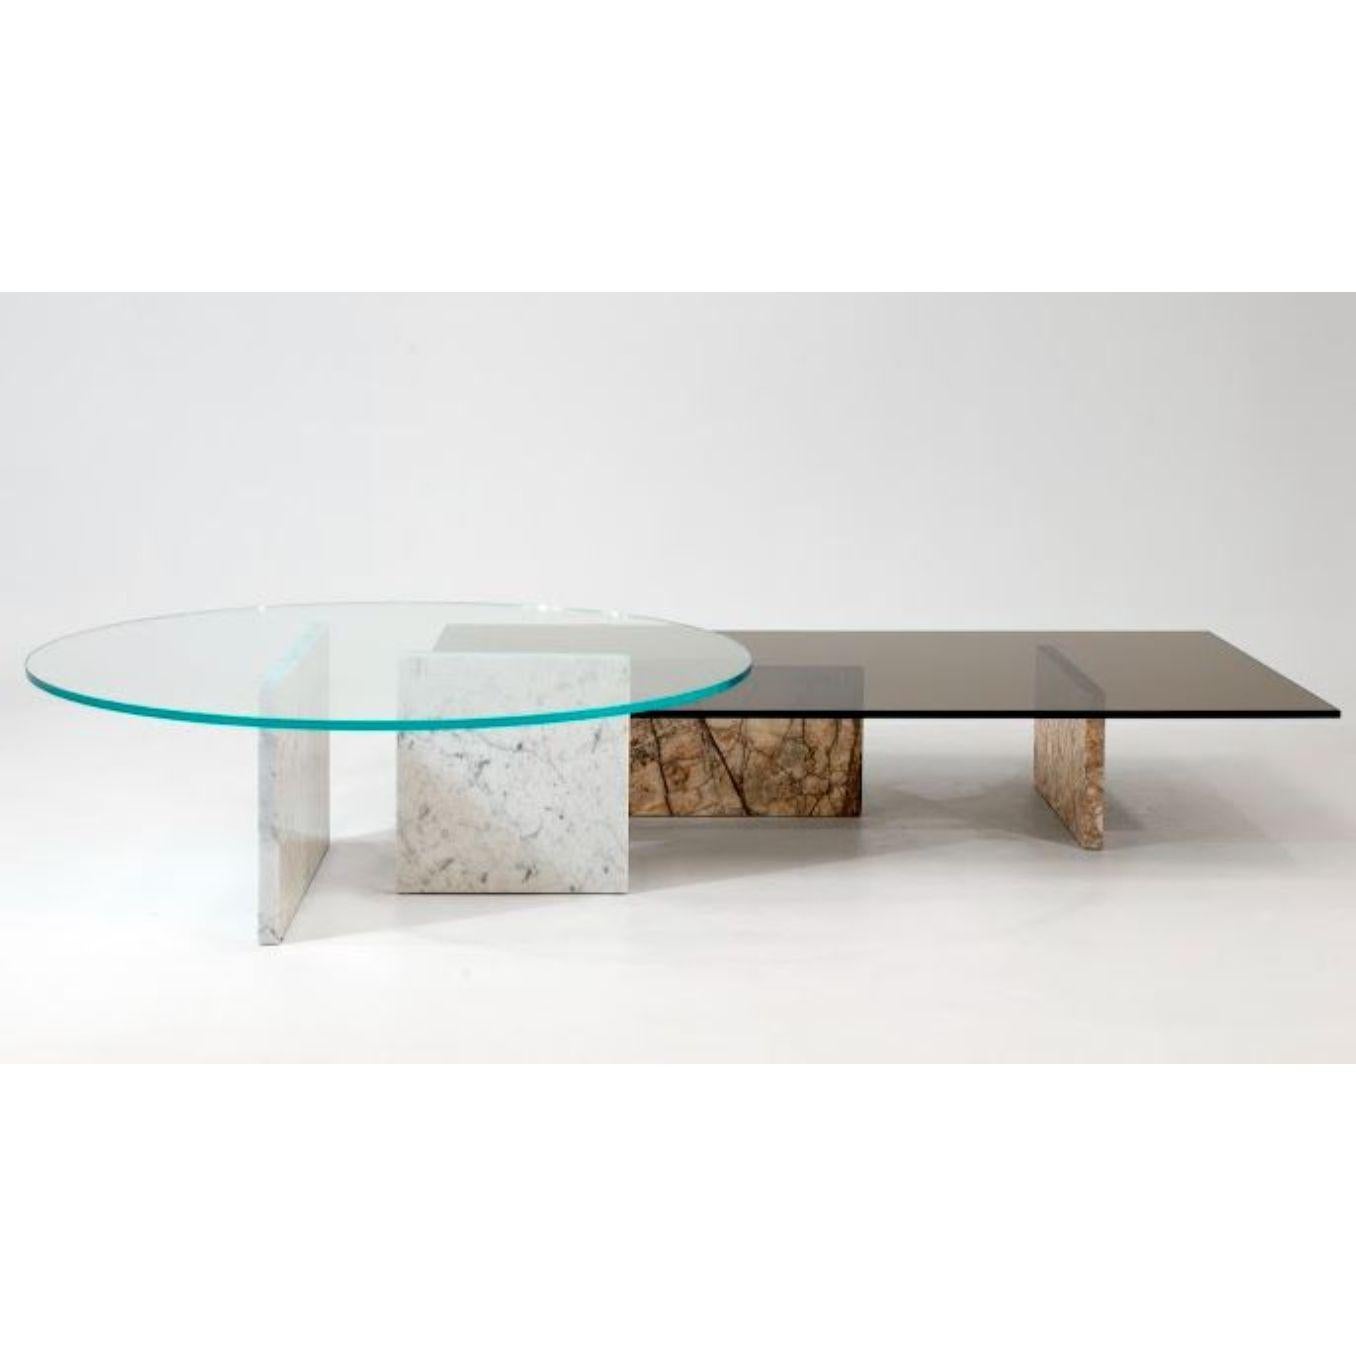 Set of 2 Remember Me Round Coffee Table by Claste
Dimensions: D 76.2 x W 137.2 x H 35.5 cm
Material: Carrara Gioia, Belvedere black, Mont Blanc, Manhatten Calacatta, Fusion marble, temptation Marble, blue Mare 
Weight: 119 kg

Since 2017 Quinlan